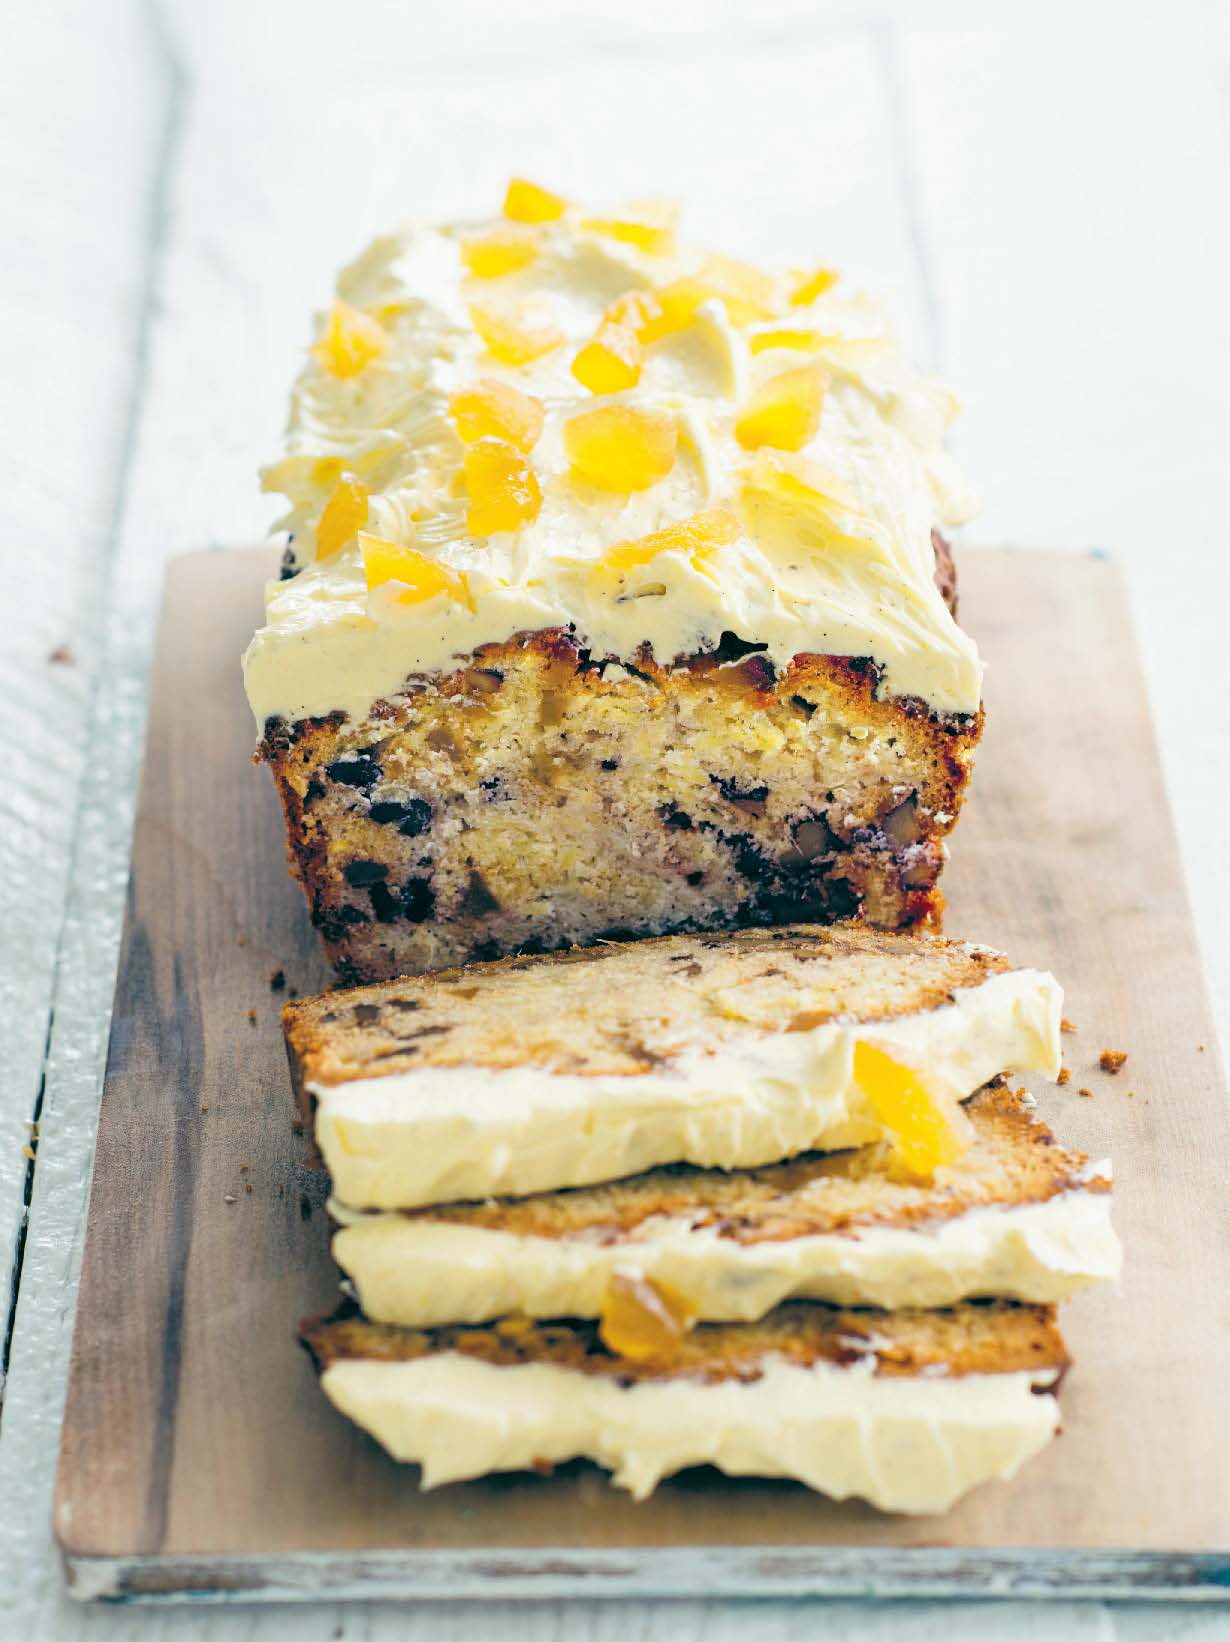 Parsnip and ginger cake